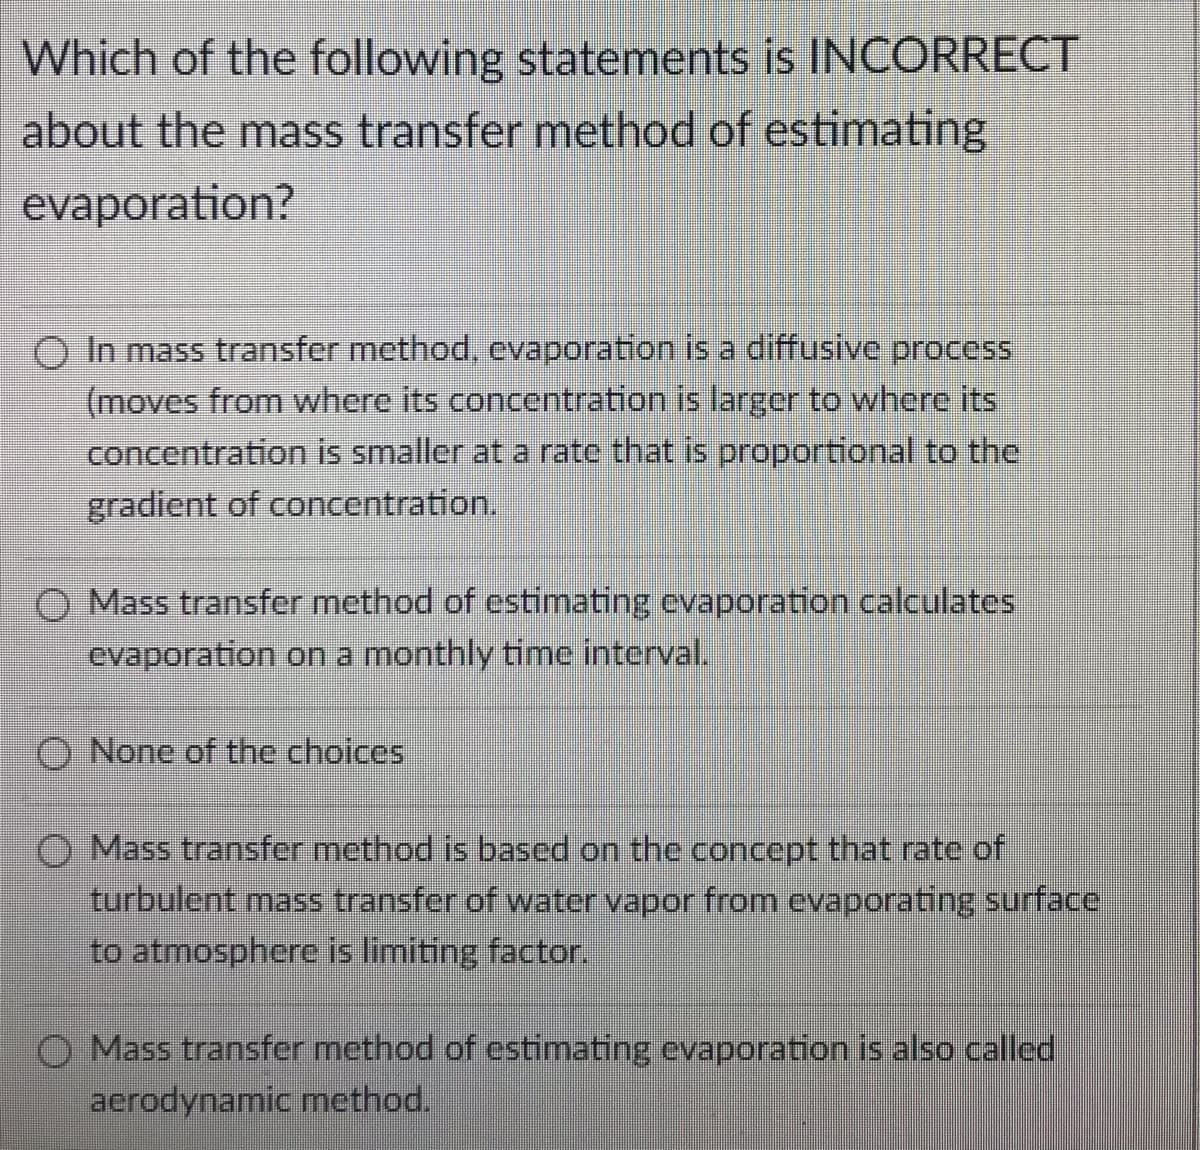 Which of the following statements is INCORRECT
about the mass transfer method of estimating
evaporation?
In mass transfer method, evaporation is a diffusive process
(moves from where its concentration is larger to where its
concentration is smaller at a rate that is proportional to the
gradient of concentration.
O Mass transfer method of estimating evaporation calculates
evaporation on a monthly time interval.
O None of the choices
O Mass transfer method is based on the concept that rate of
turbulent mass transfer of water vapor from evaporating surface
to atmosphere is limiting factor.
Mass transfer method of estimating evaporation is also called
aerodynamic method.
